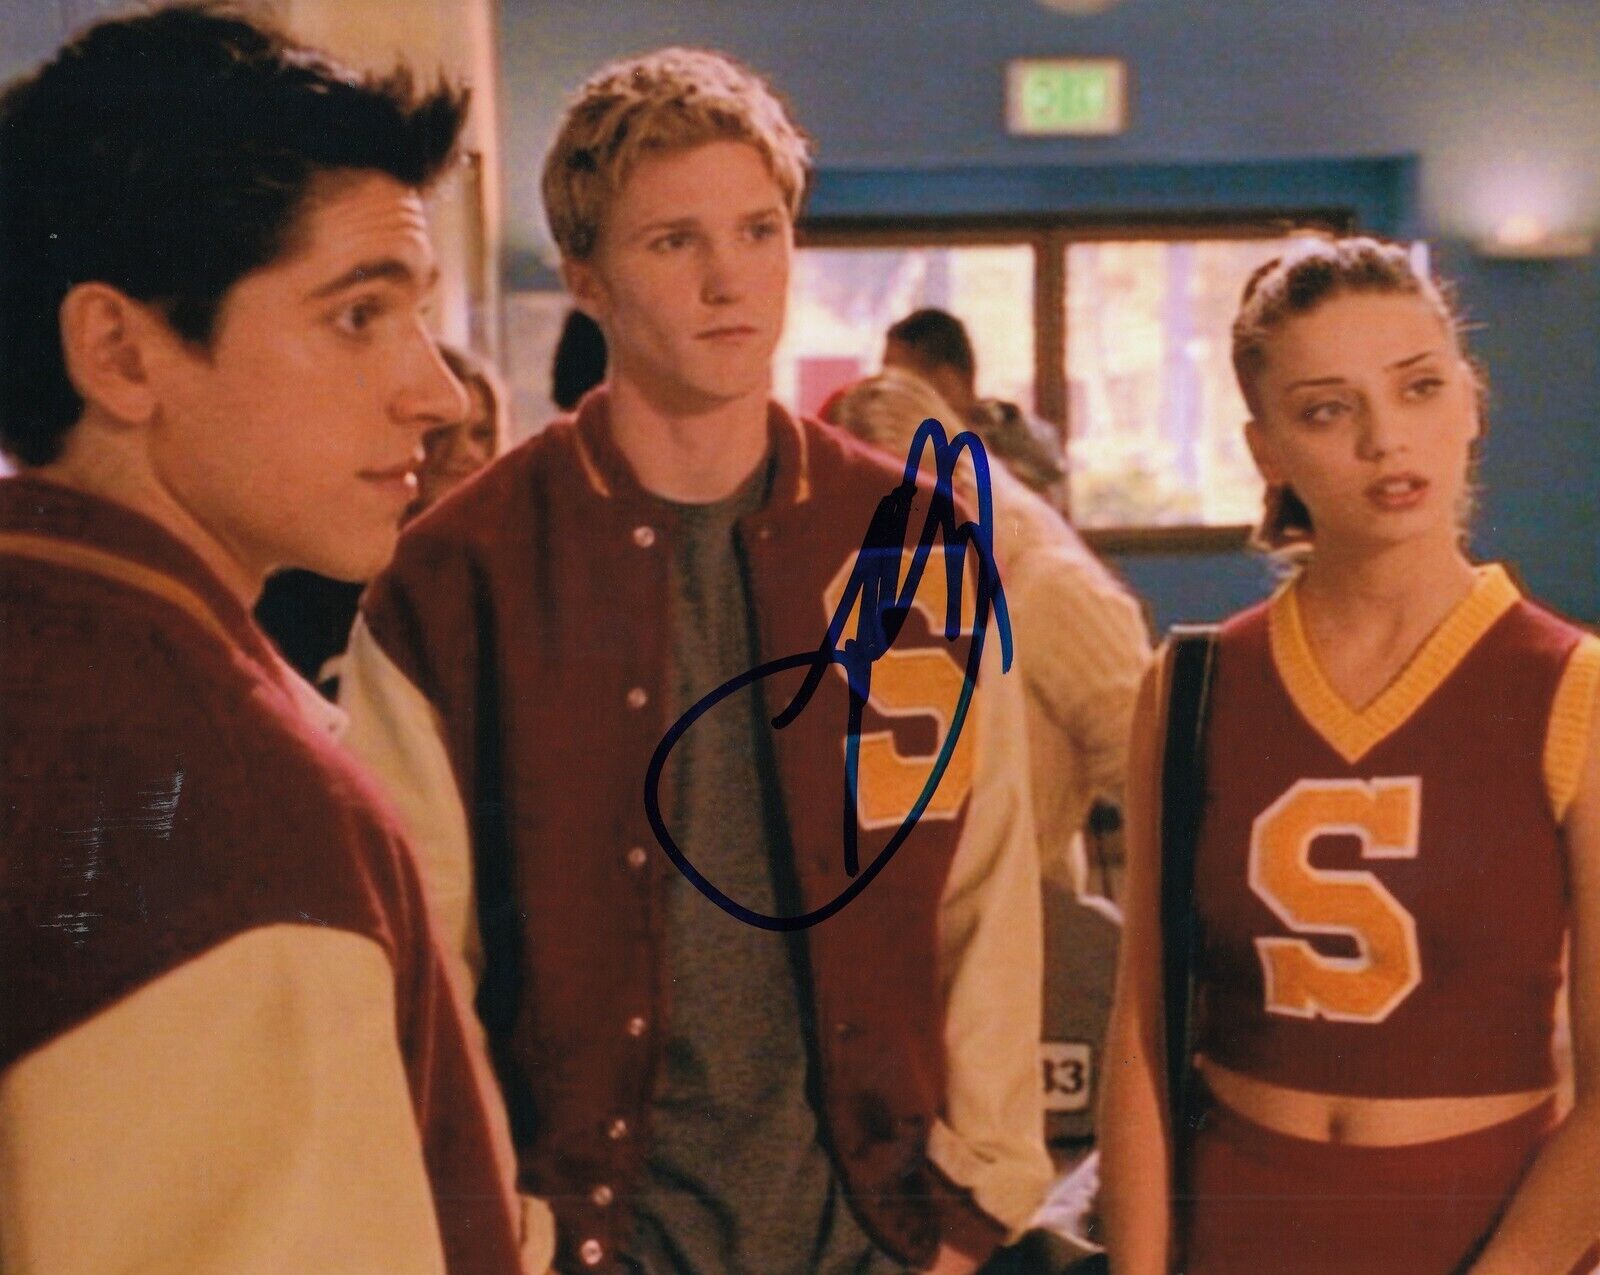 THAD LUCKINBILL signed (BUFFY THE VAMPIRE SLAYER) 8X10 Photo Poster painting R.J BROOKS W/COA #2